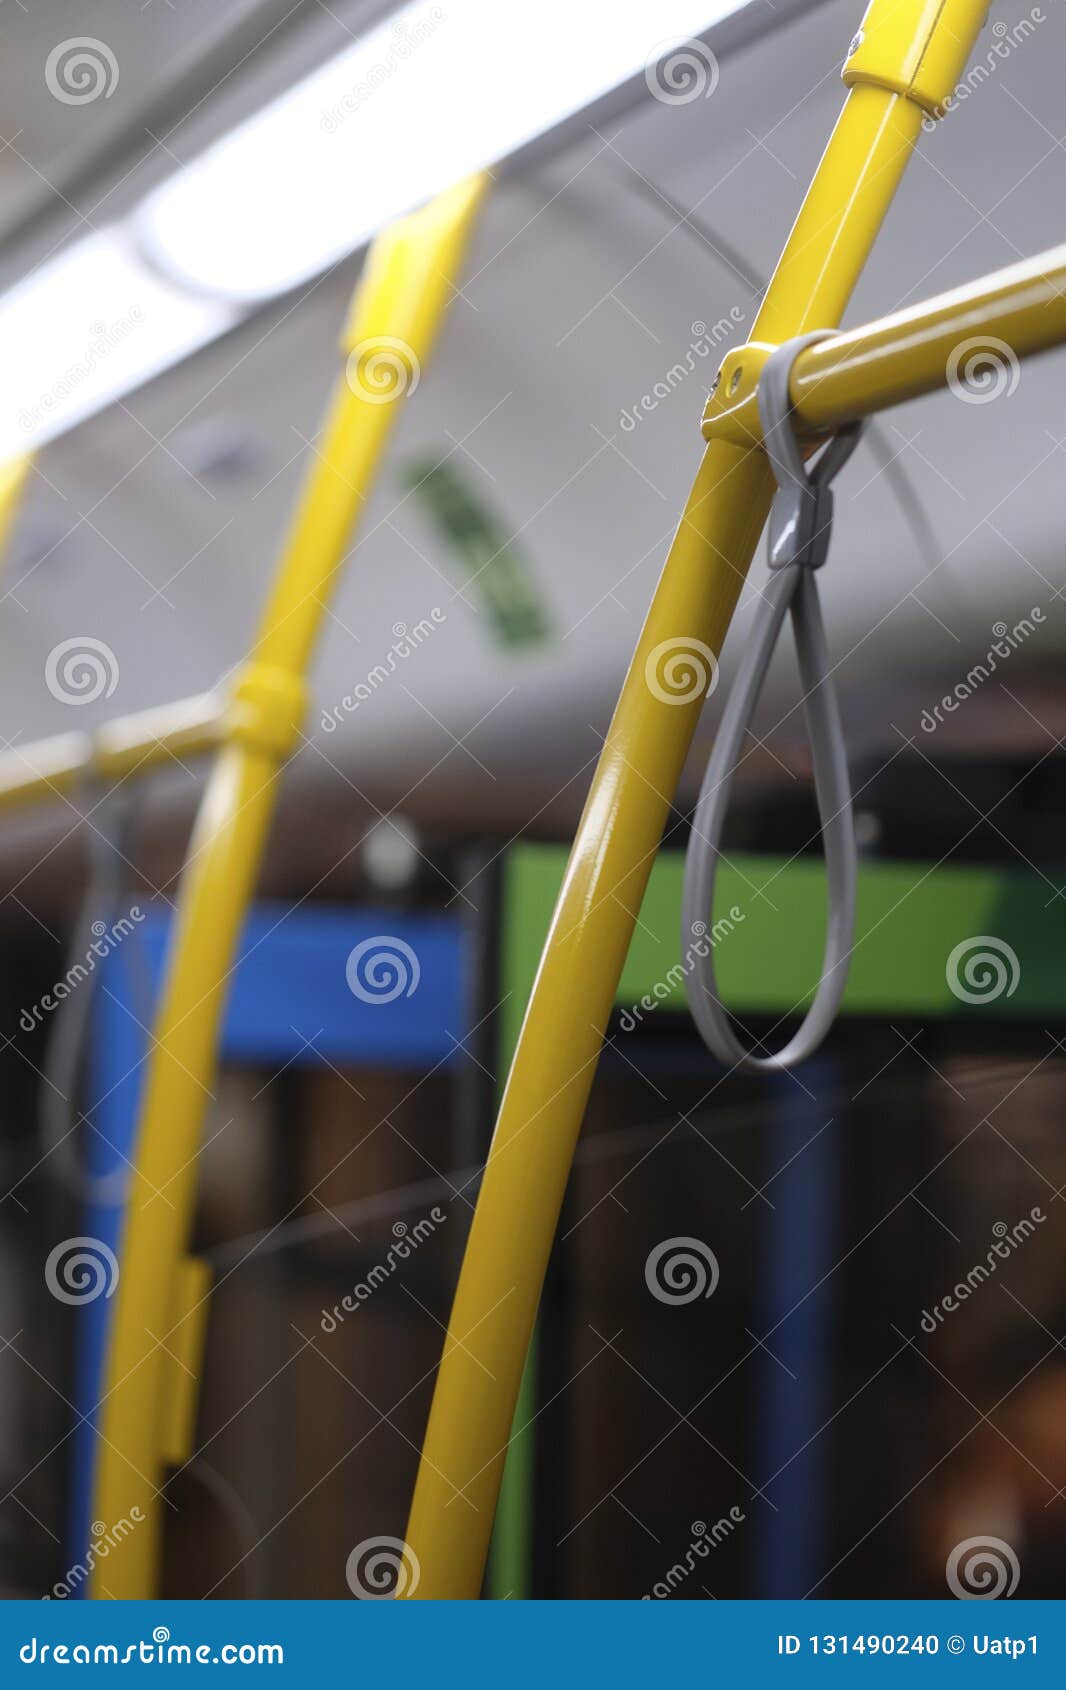 Image Of The Bus Interior Stock Photo Image Of Public